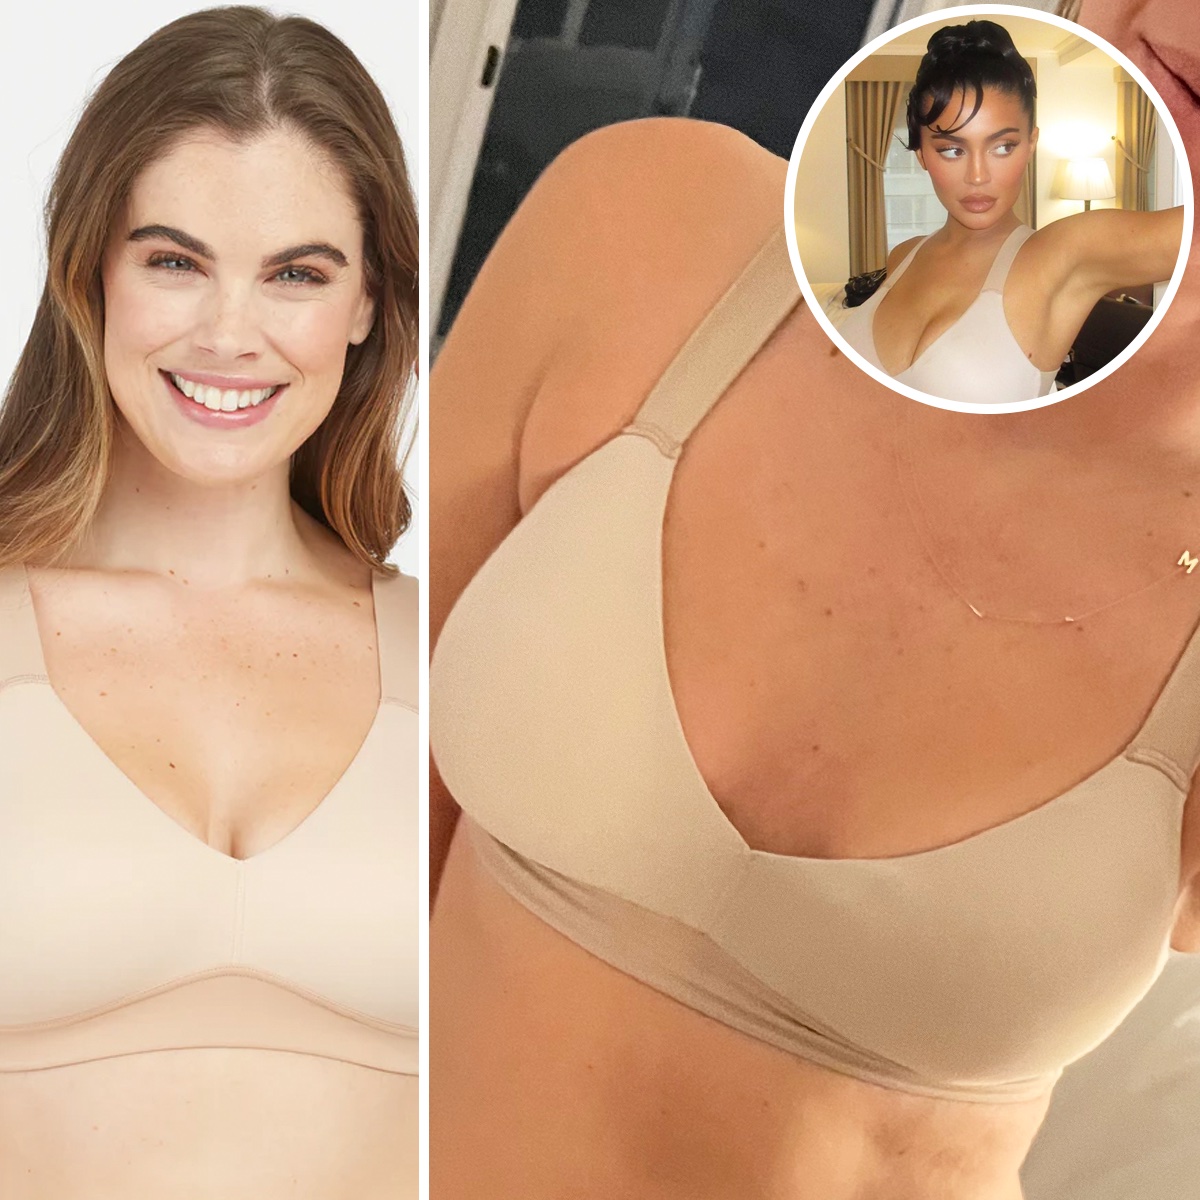 What Color Bra Should You Wear Under A White Shirt? - SHEfinds